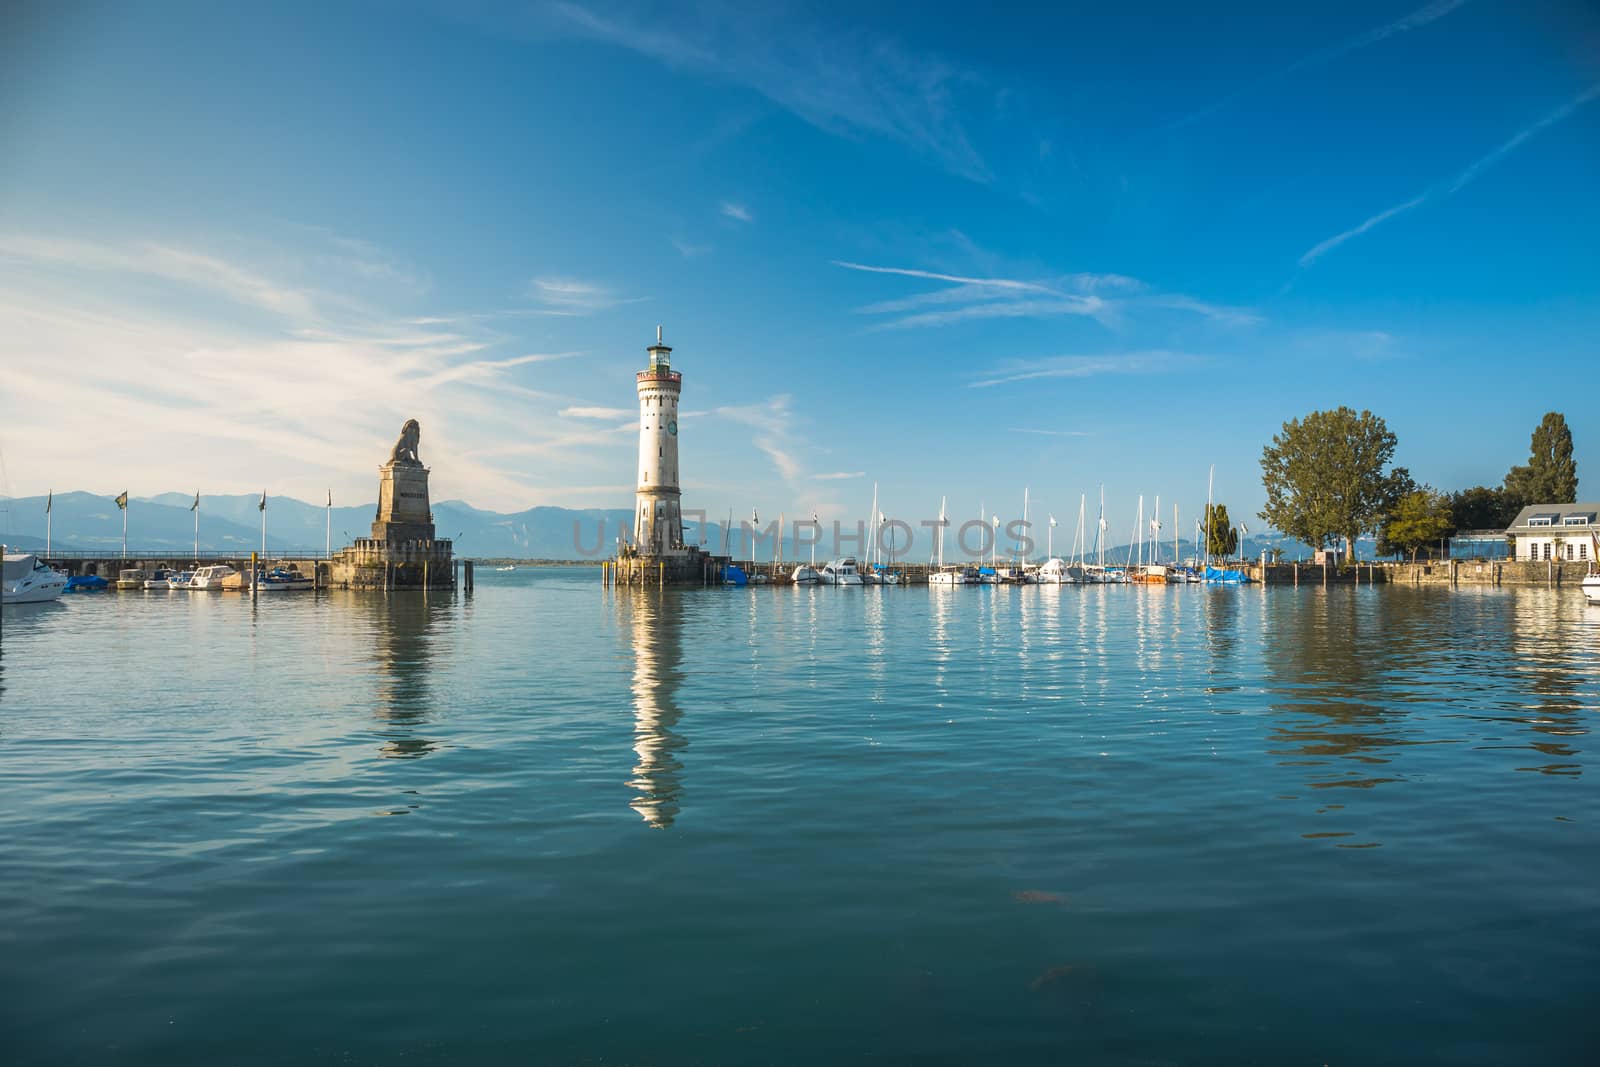 Harbour entrance of Lindau, Lake Constance - Germ. - Bodensee - with the new lighthouse and the Bavarian Lion. The Lindau lighthouse is the southernmost lighthouse in Germany by petrsvoboda91